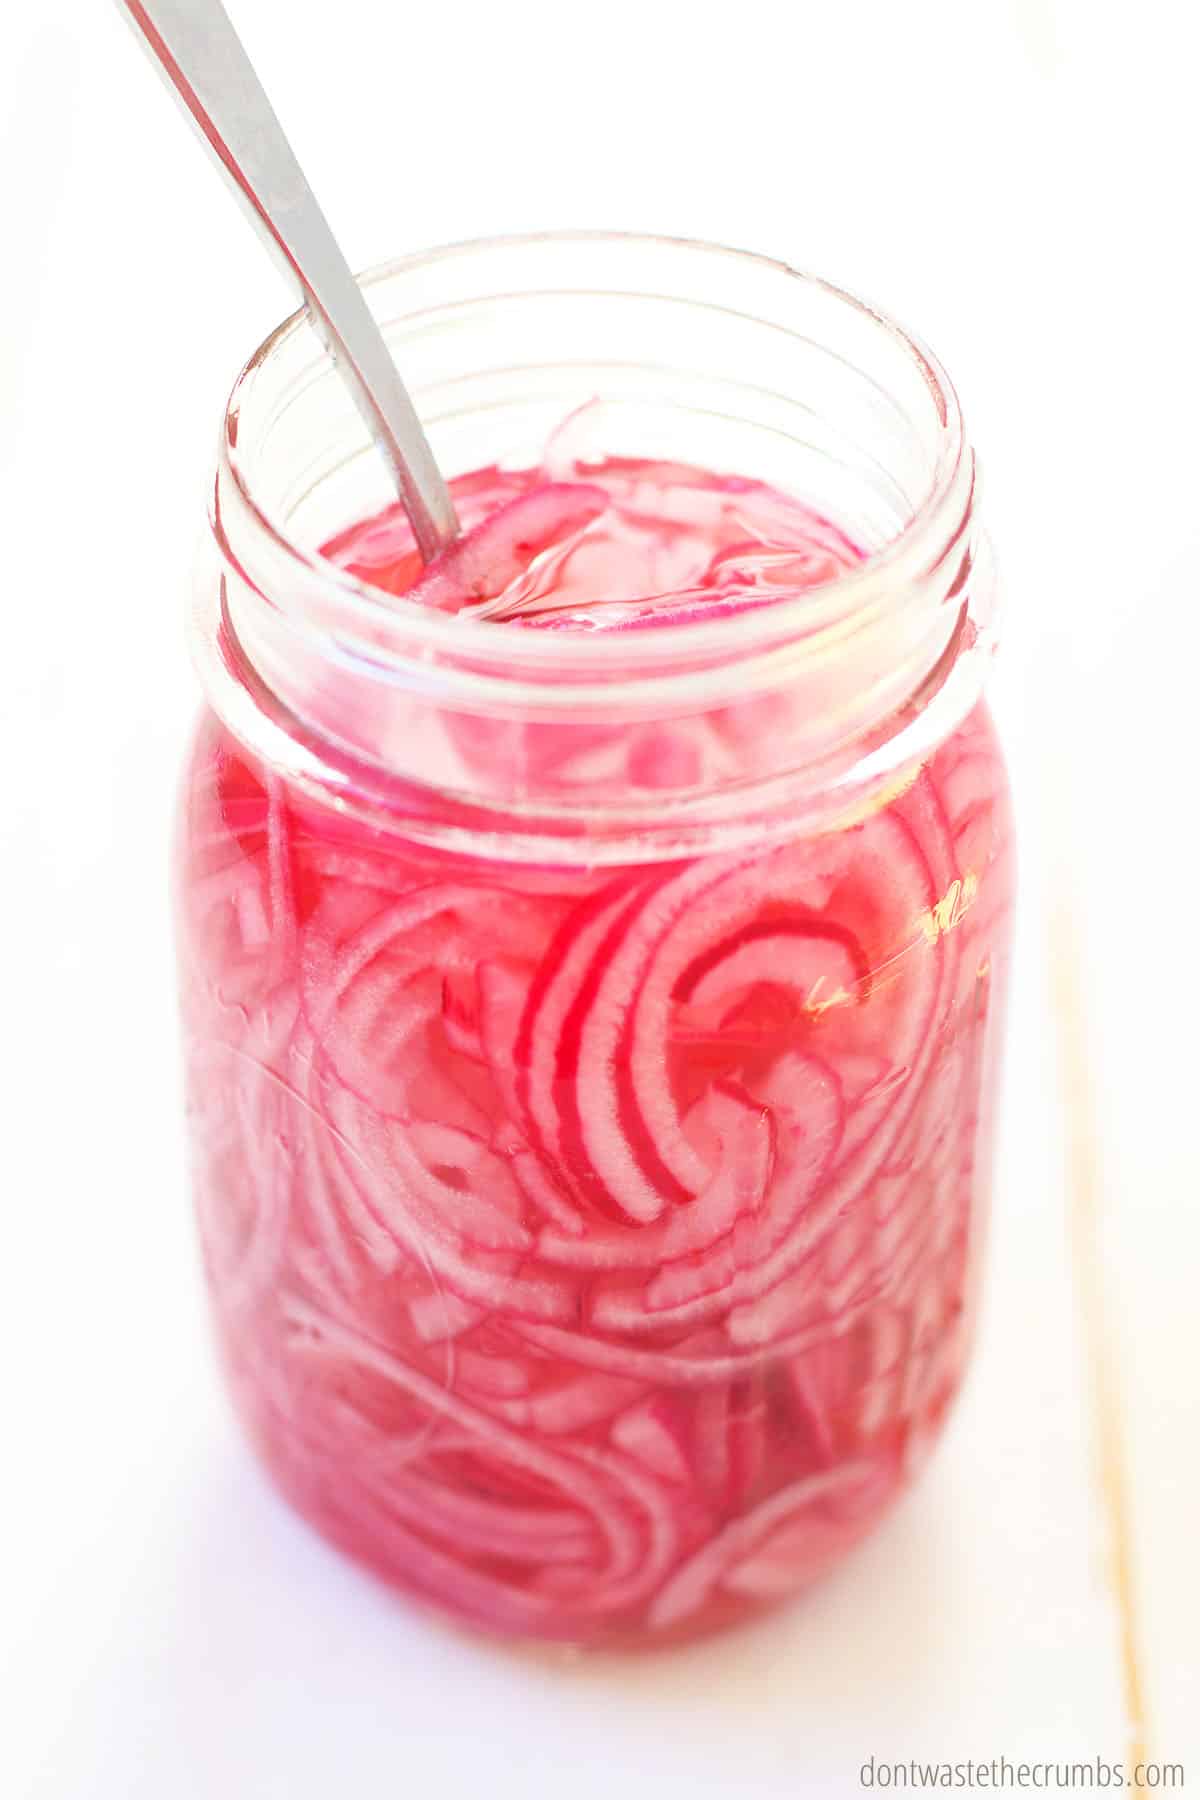 This easy pickled red onion recipe is ready and in a pint size glass mason jar with a spoon inside ready to be scooped.